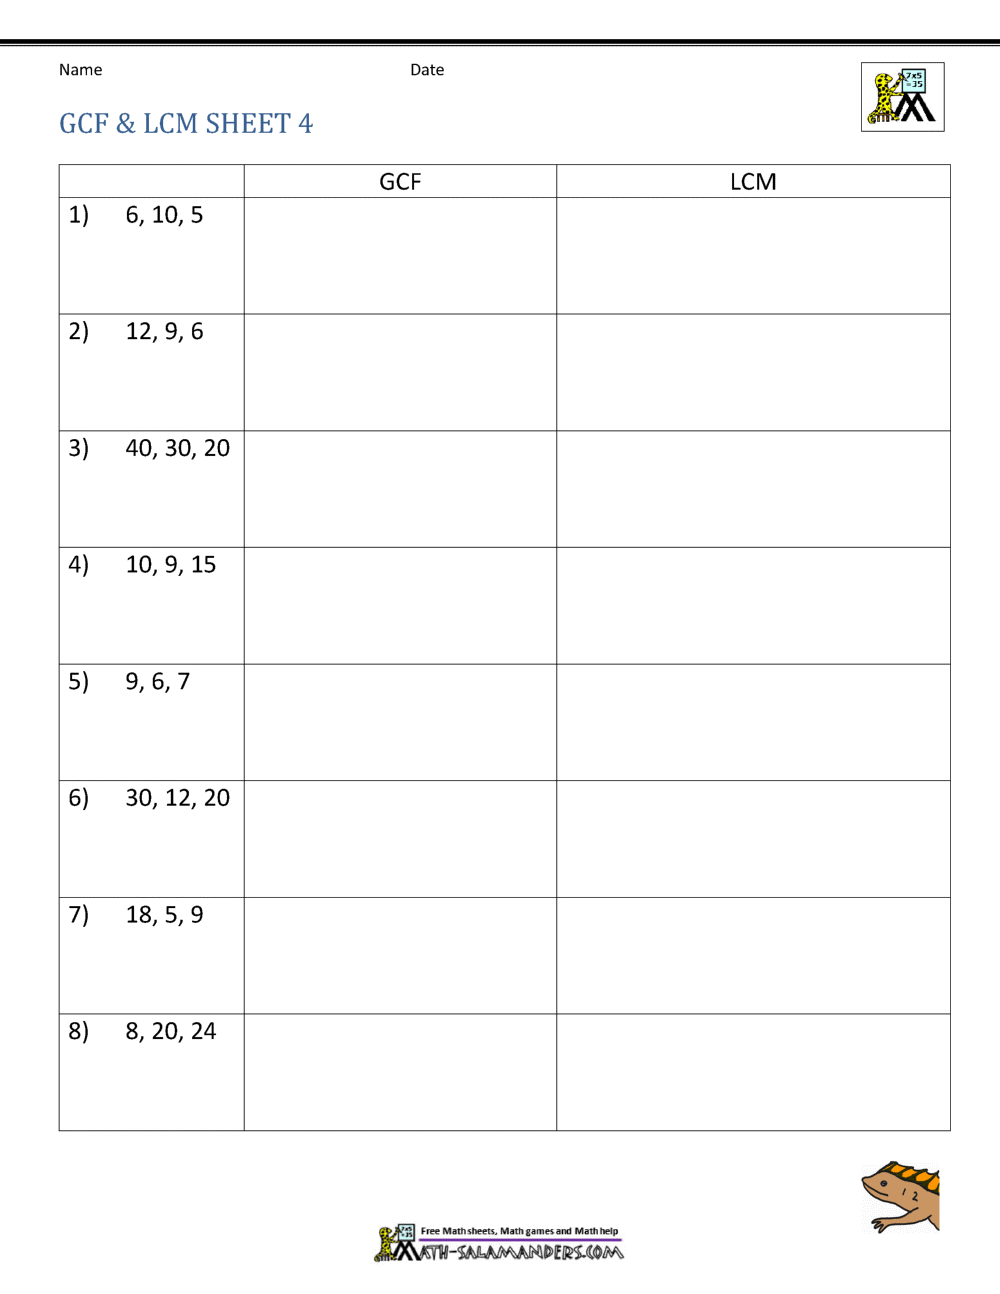 gcf-and-lcm-worksheets